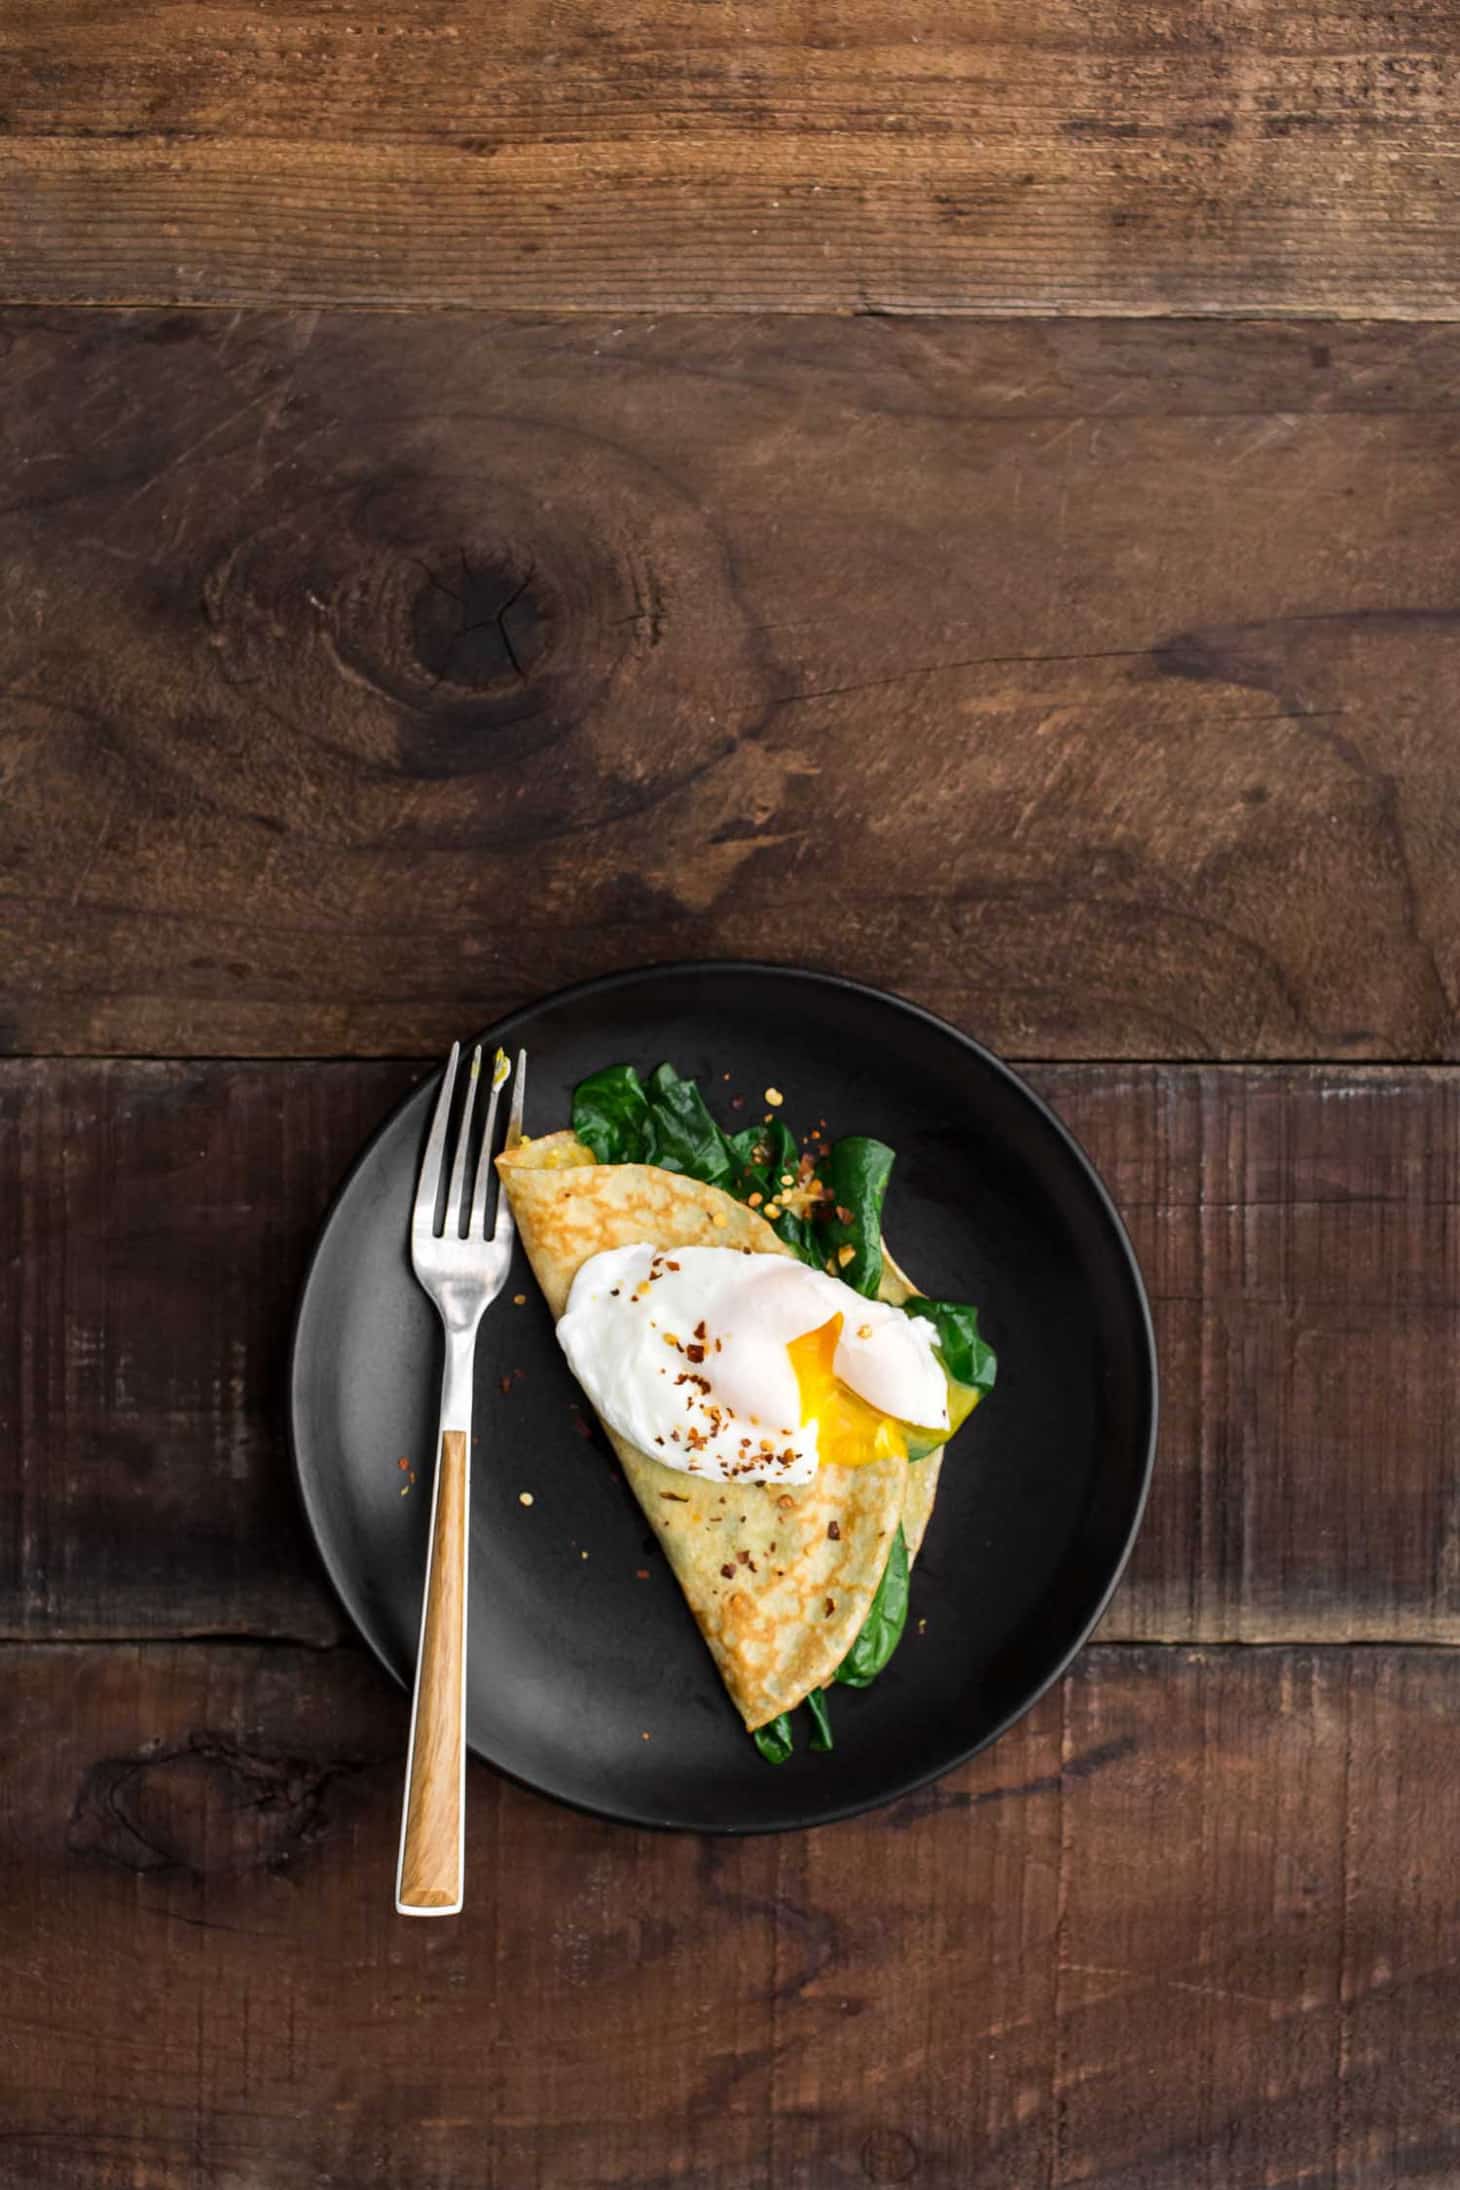 Garlicky Spinach Cornmeal Crepes with Poached Egg | Naturally Ella